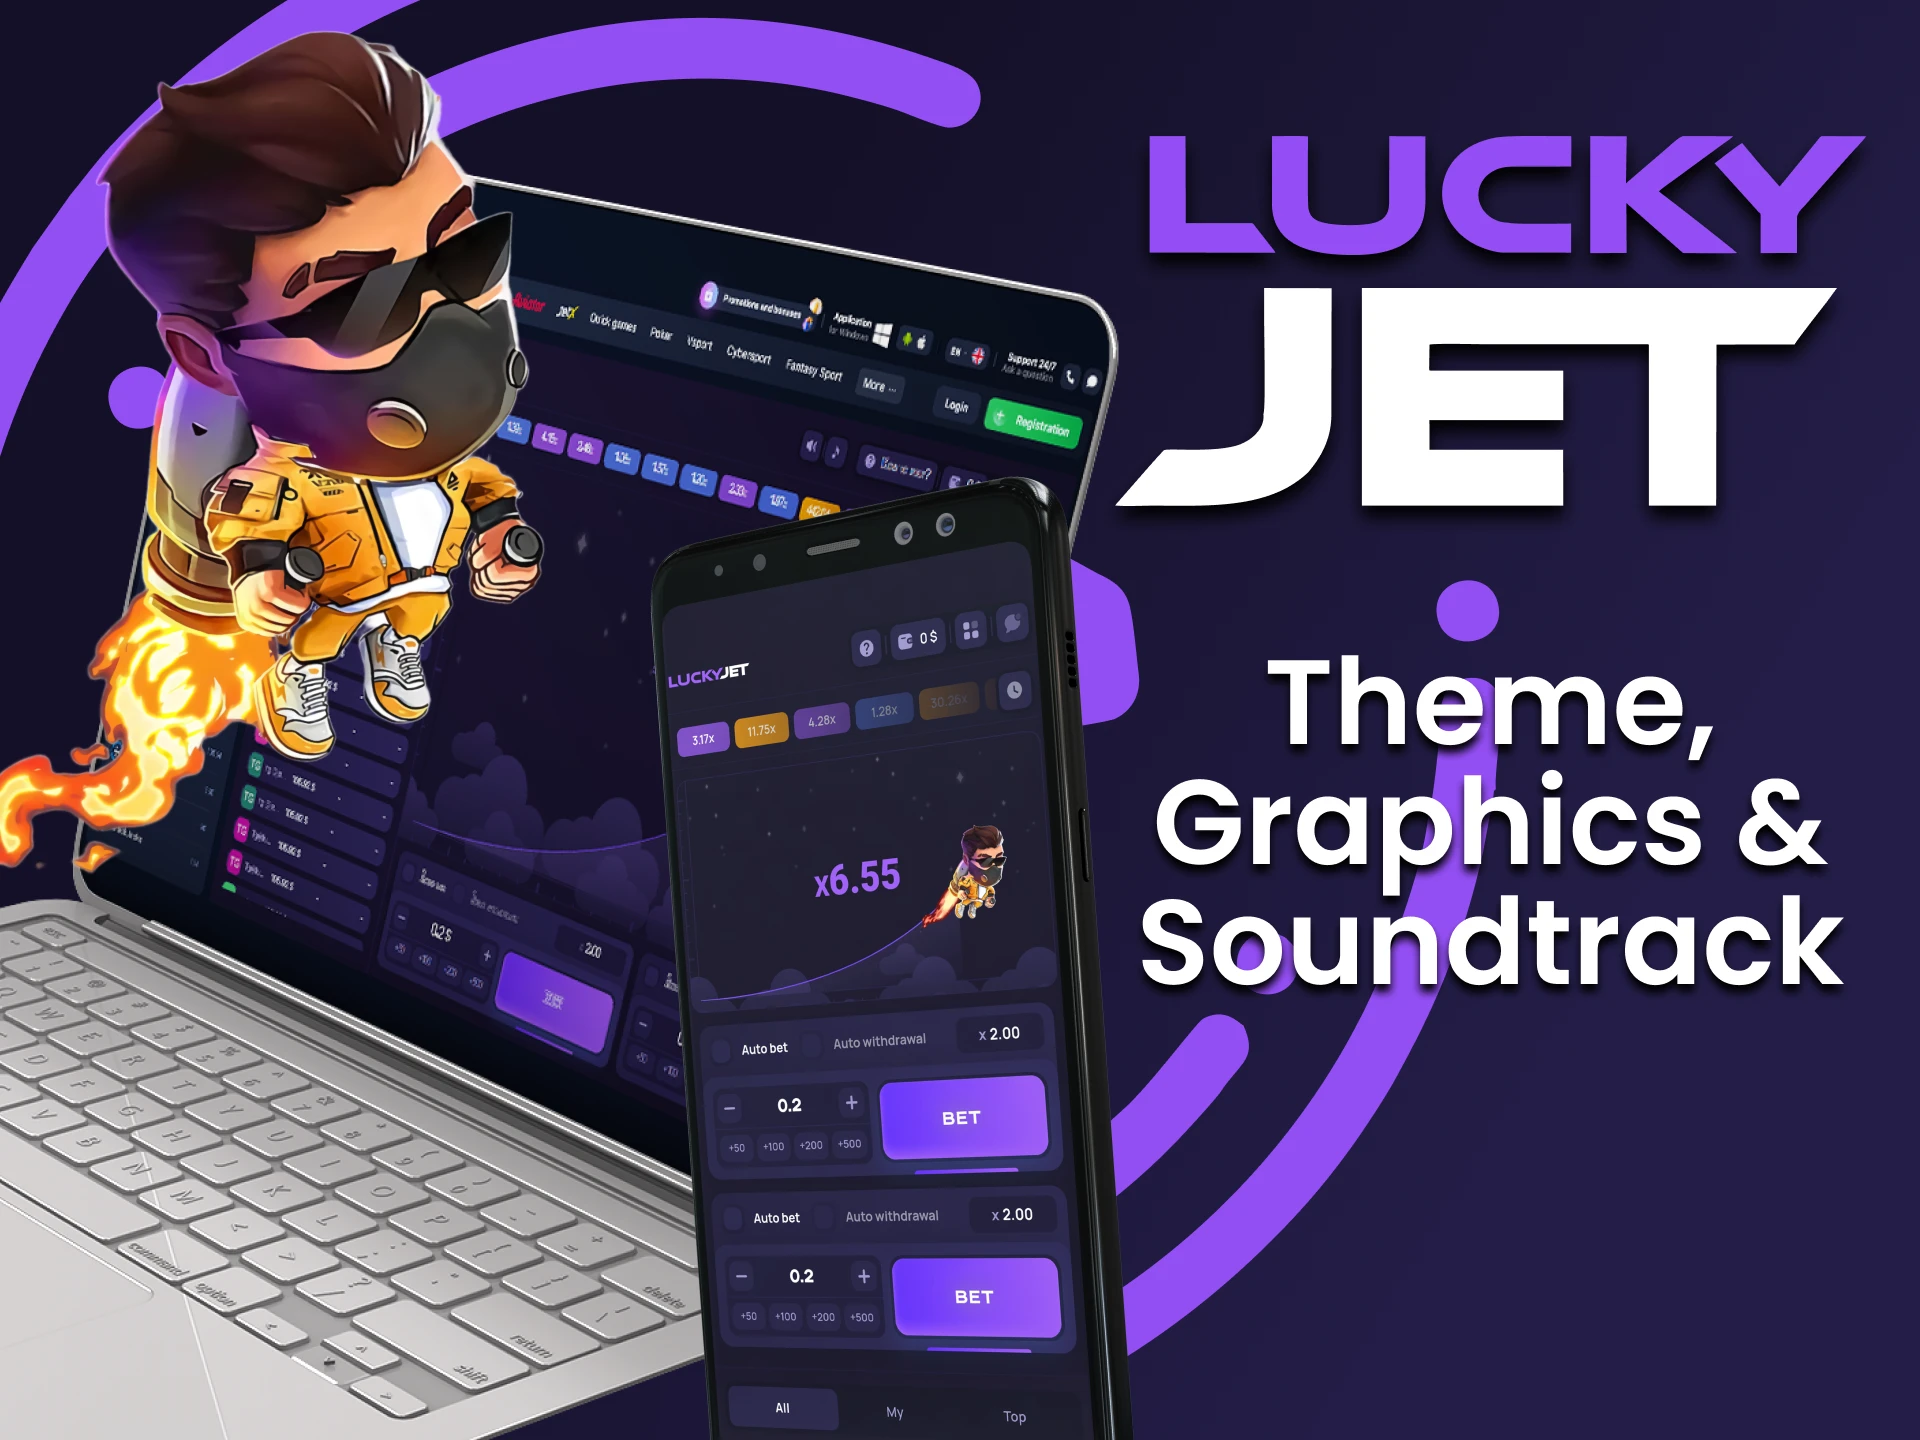 Lucky Jet game has good music background, elaborate graphics and atmospheric game theme.